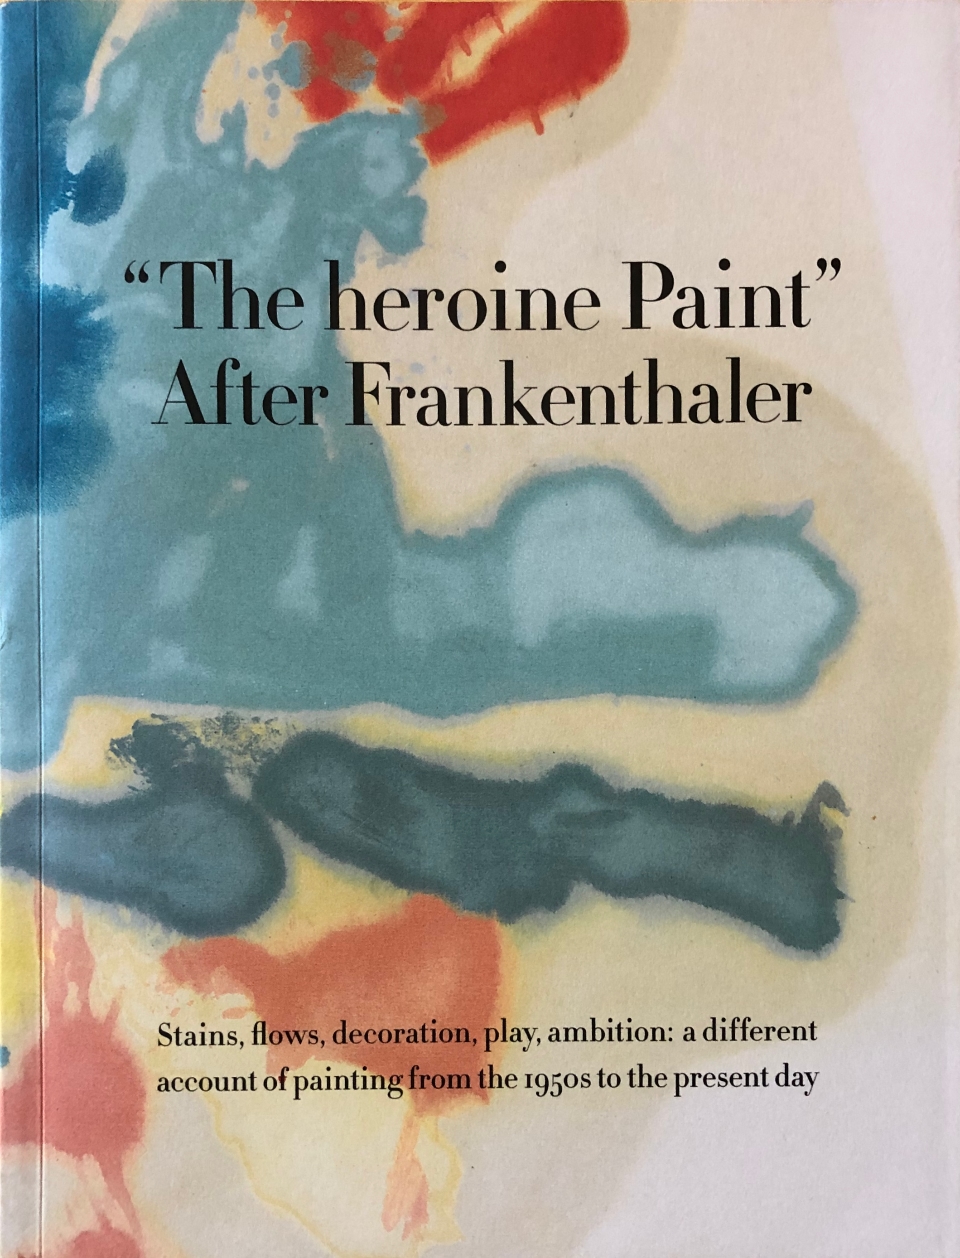 The heroine Paint, book cover